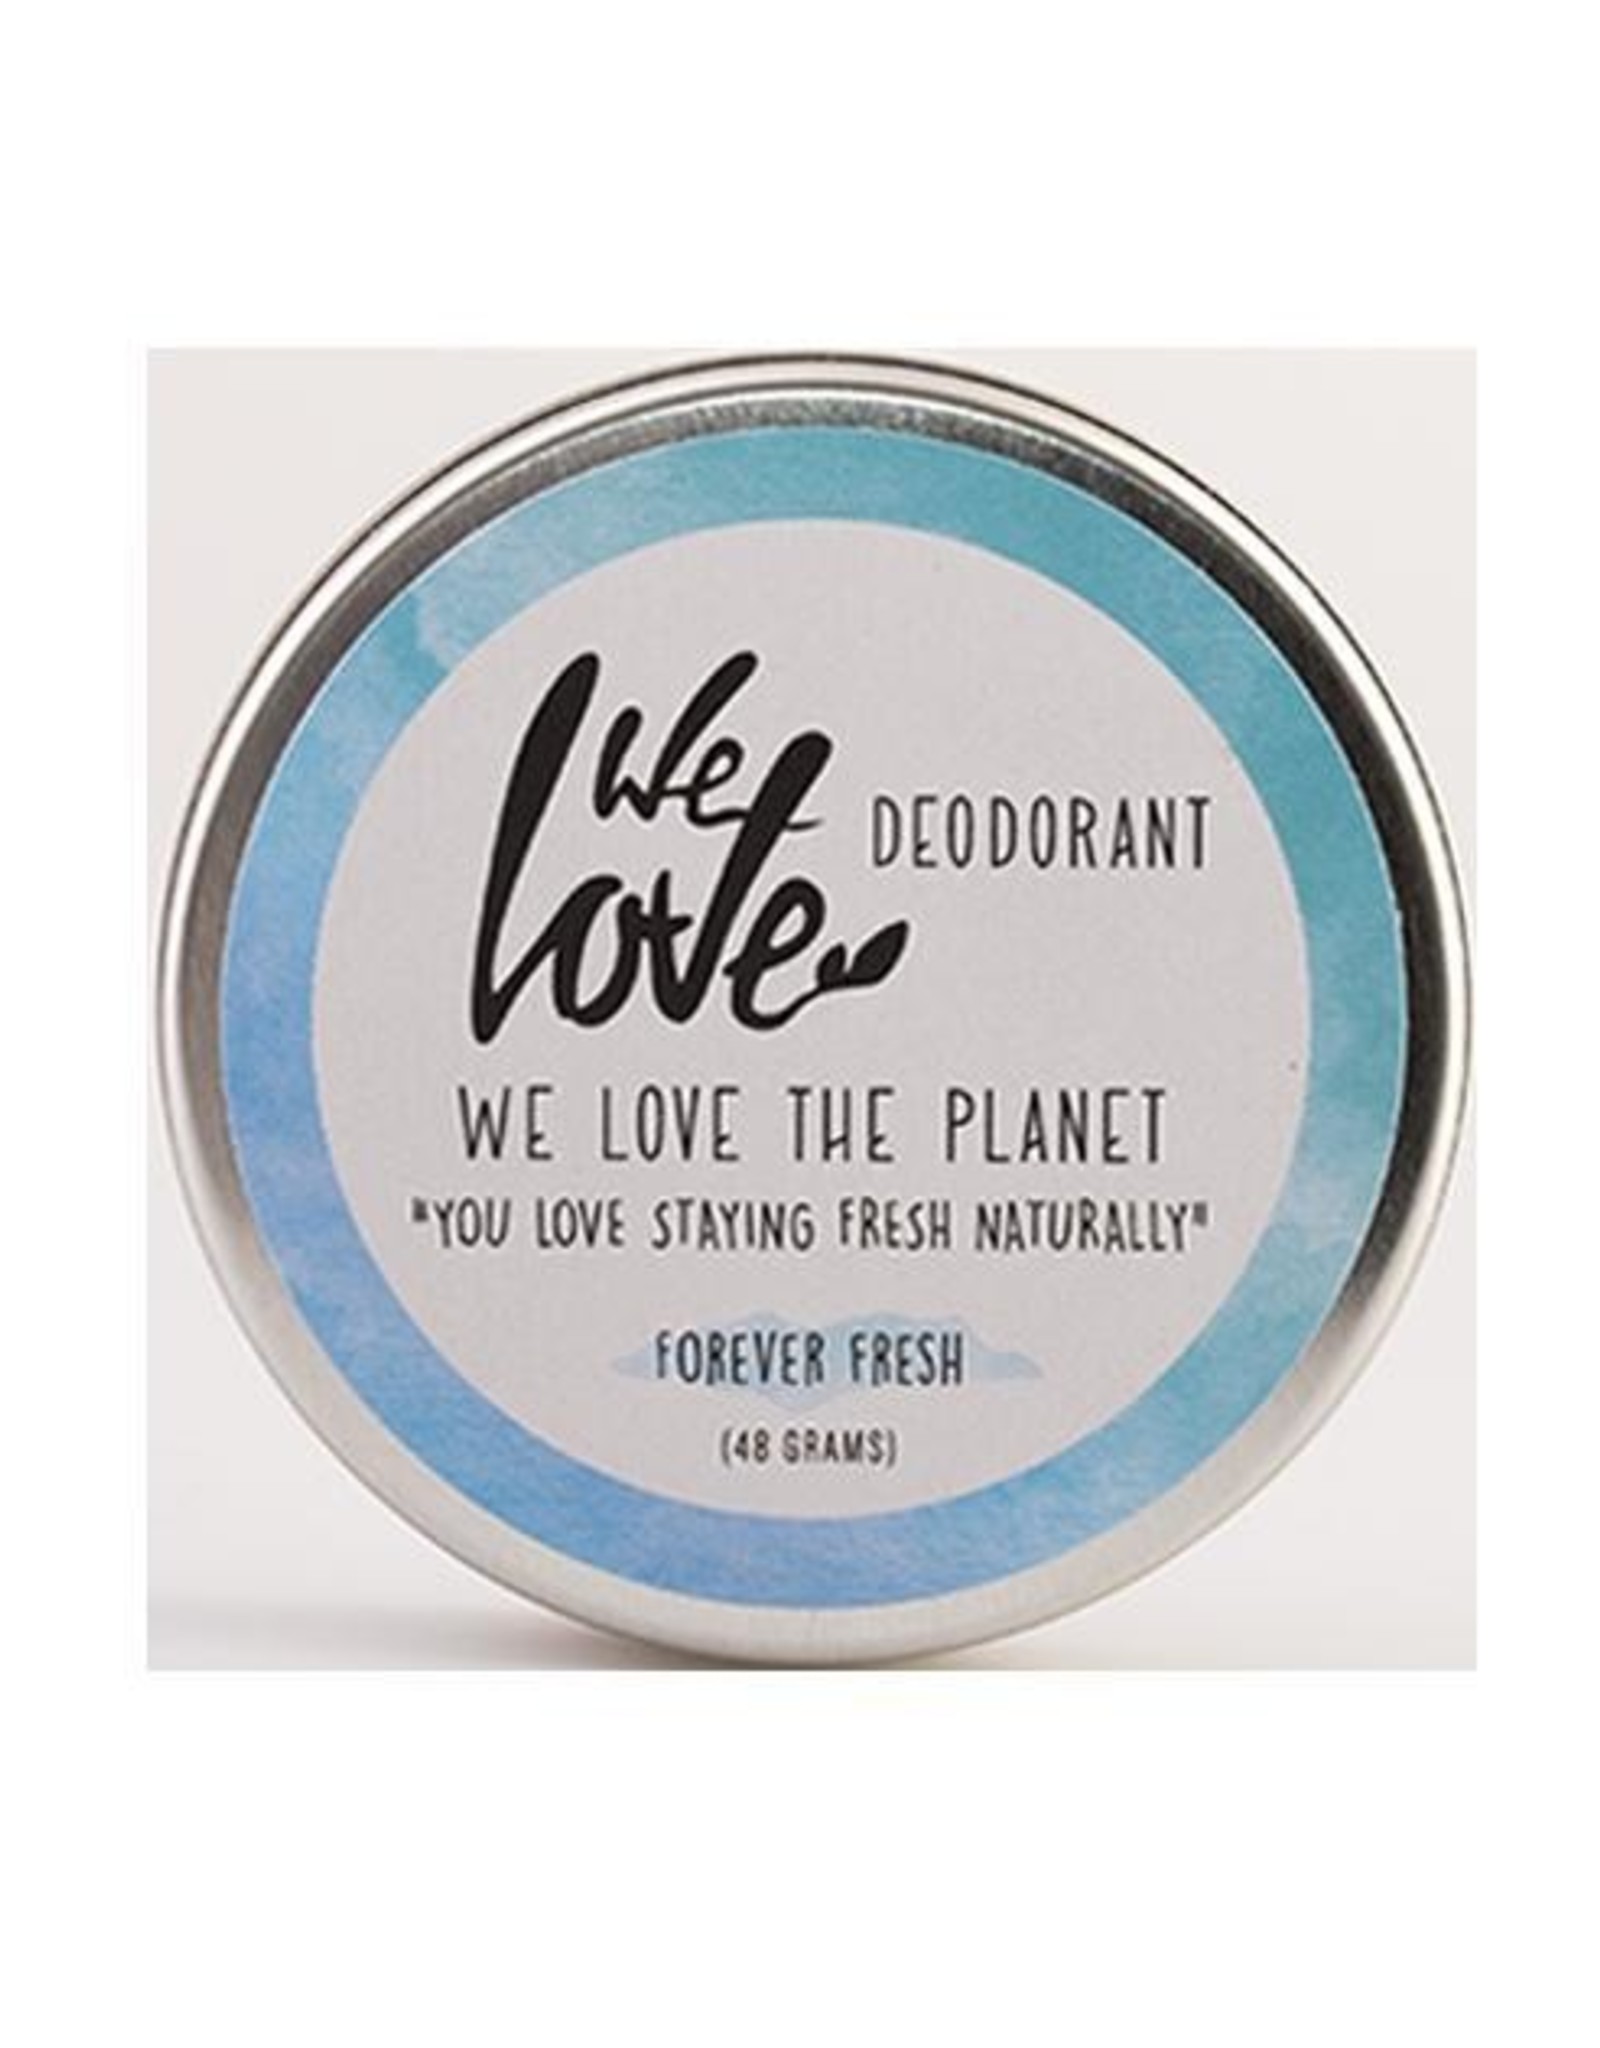 We love the planet The planet 100% natural deodorant forever fresh 48g